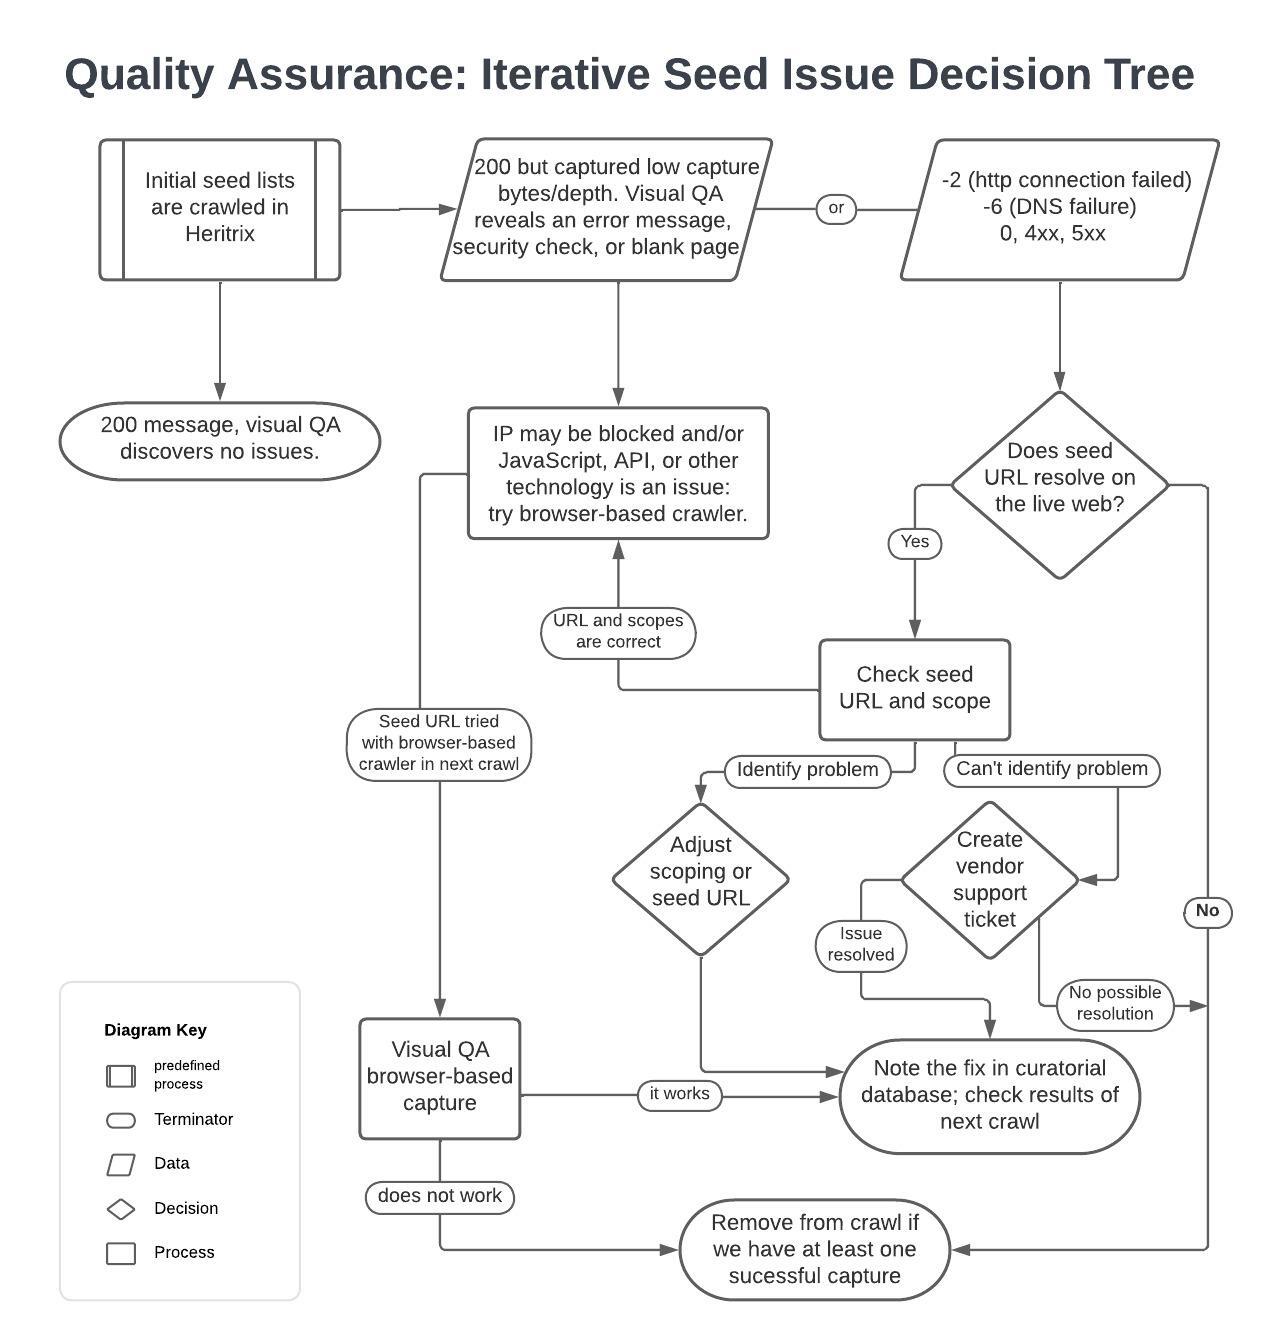 Quality Assurance: Seed Issue Decision Tree